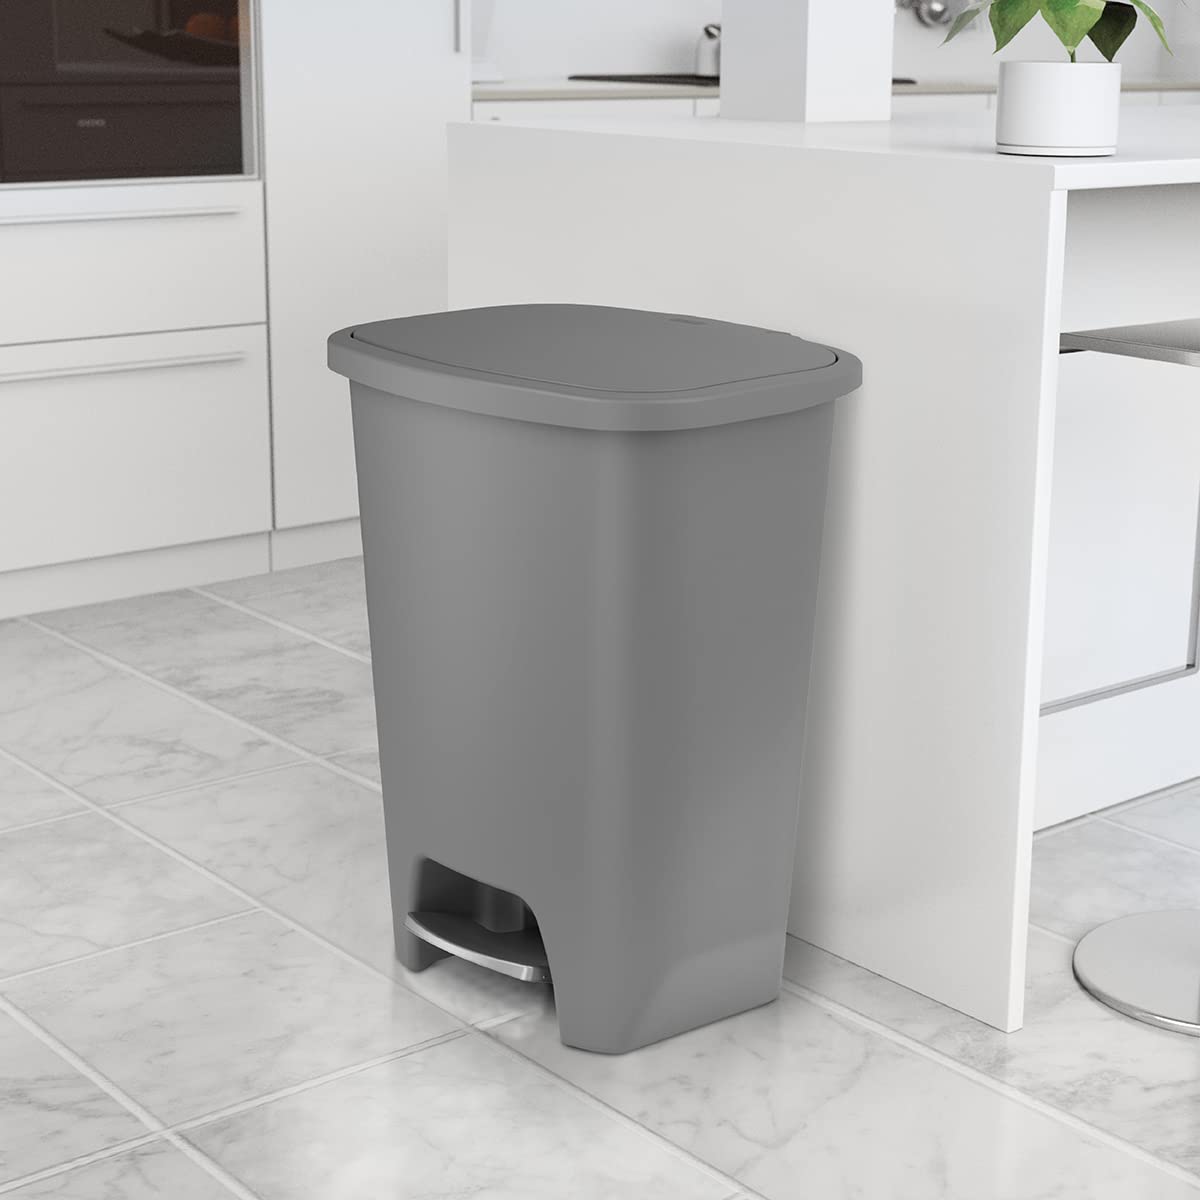 Glad 20 Gallon Trash Can - Plastic Kitchen Waste Bin with Odor Protection  of Lid - Hands Free with Step On Foot Pedal and Garbage Bag Rings, Black